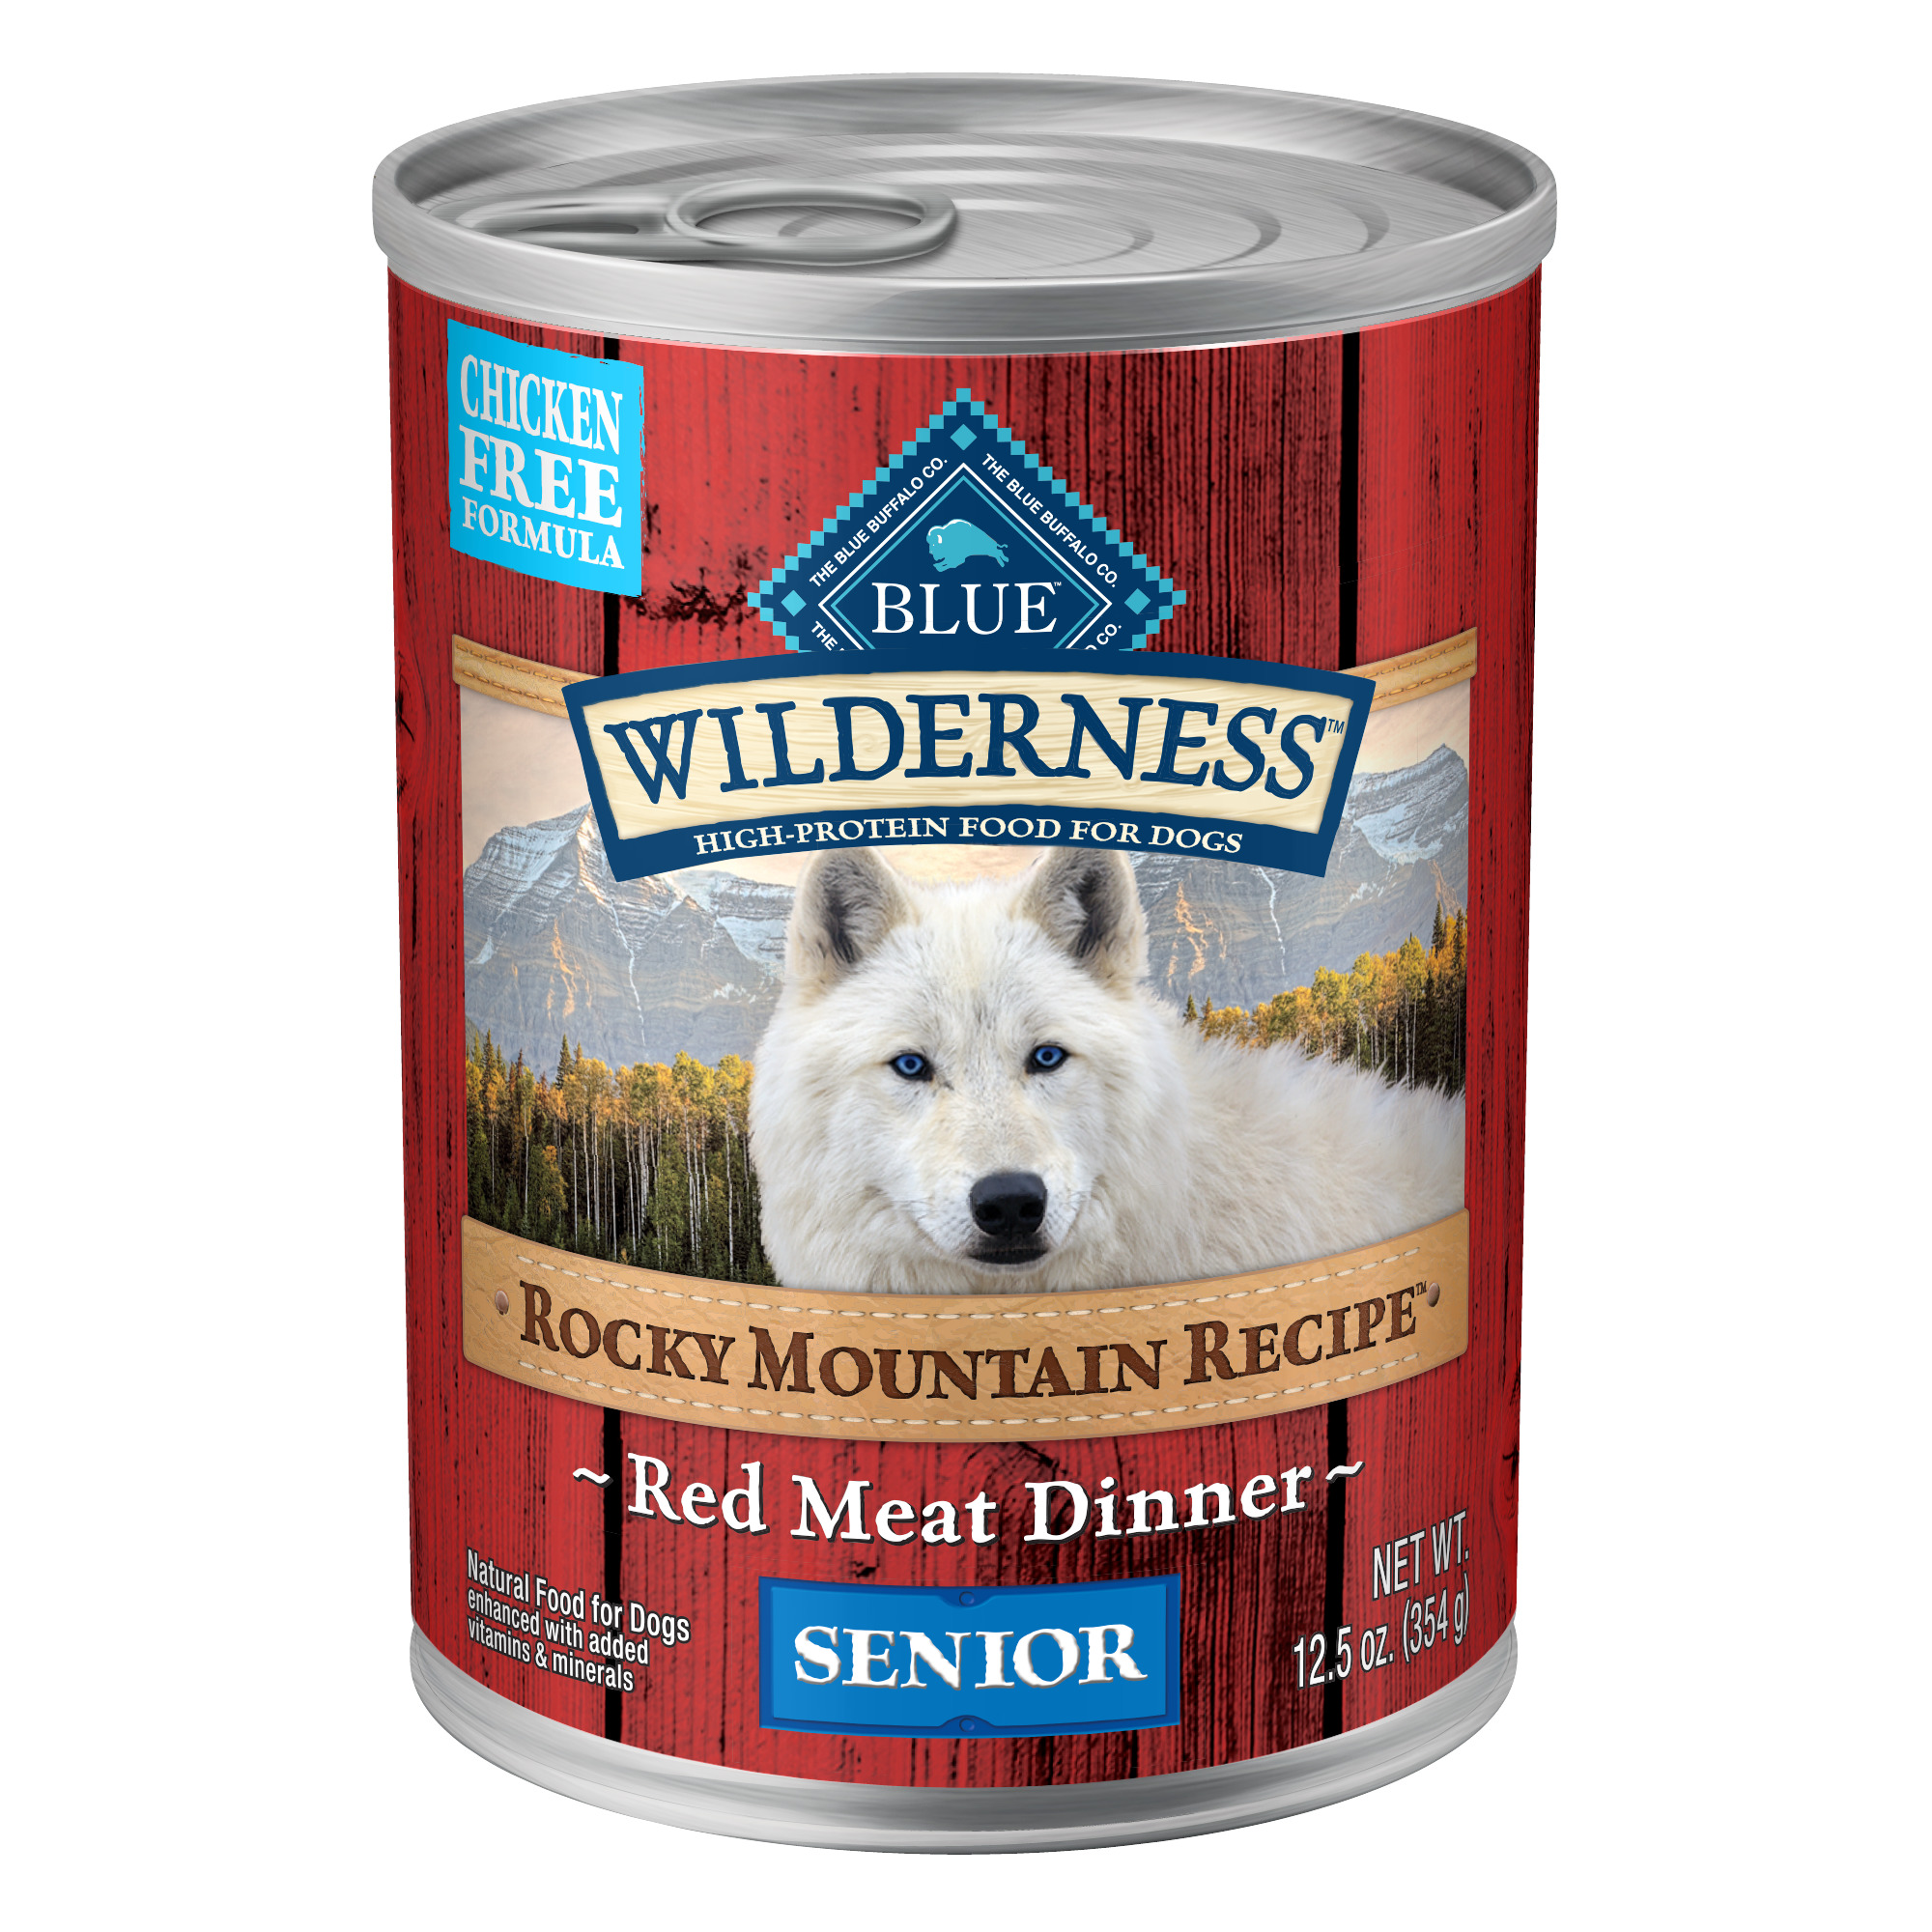 BLUE Wilderness Rocky Mountain Recipe Red Meat Dinner for Senior Dogs, 12.5 oz